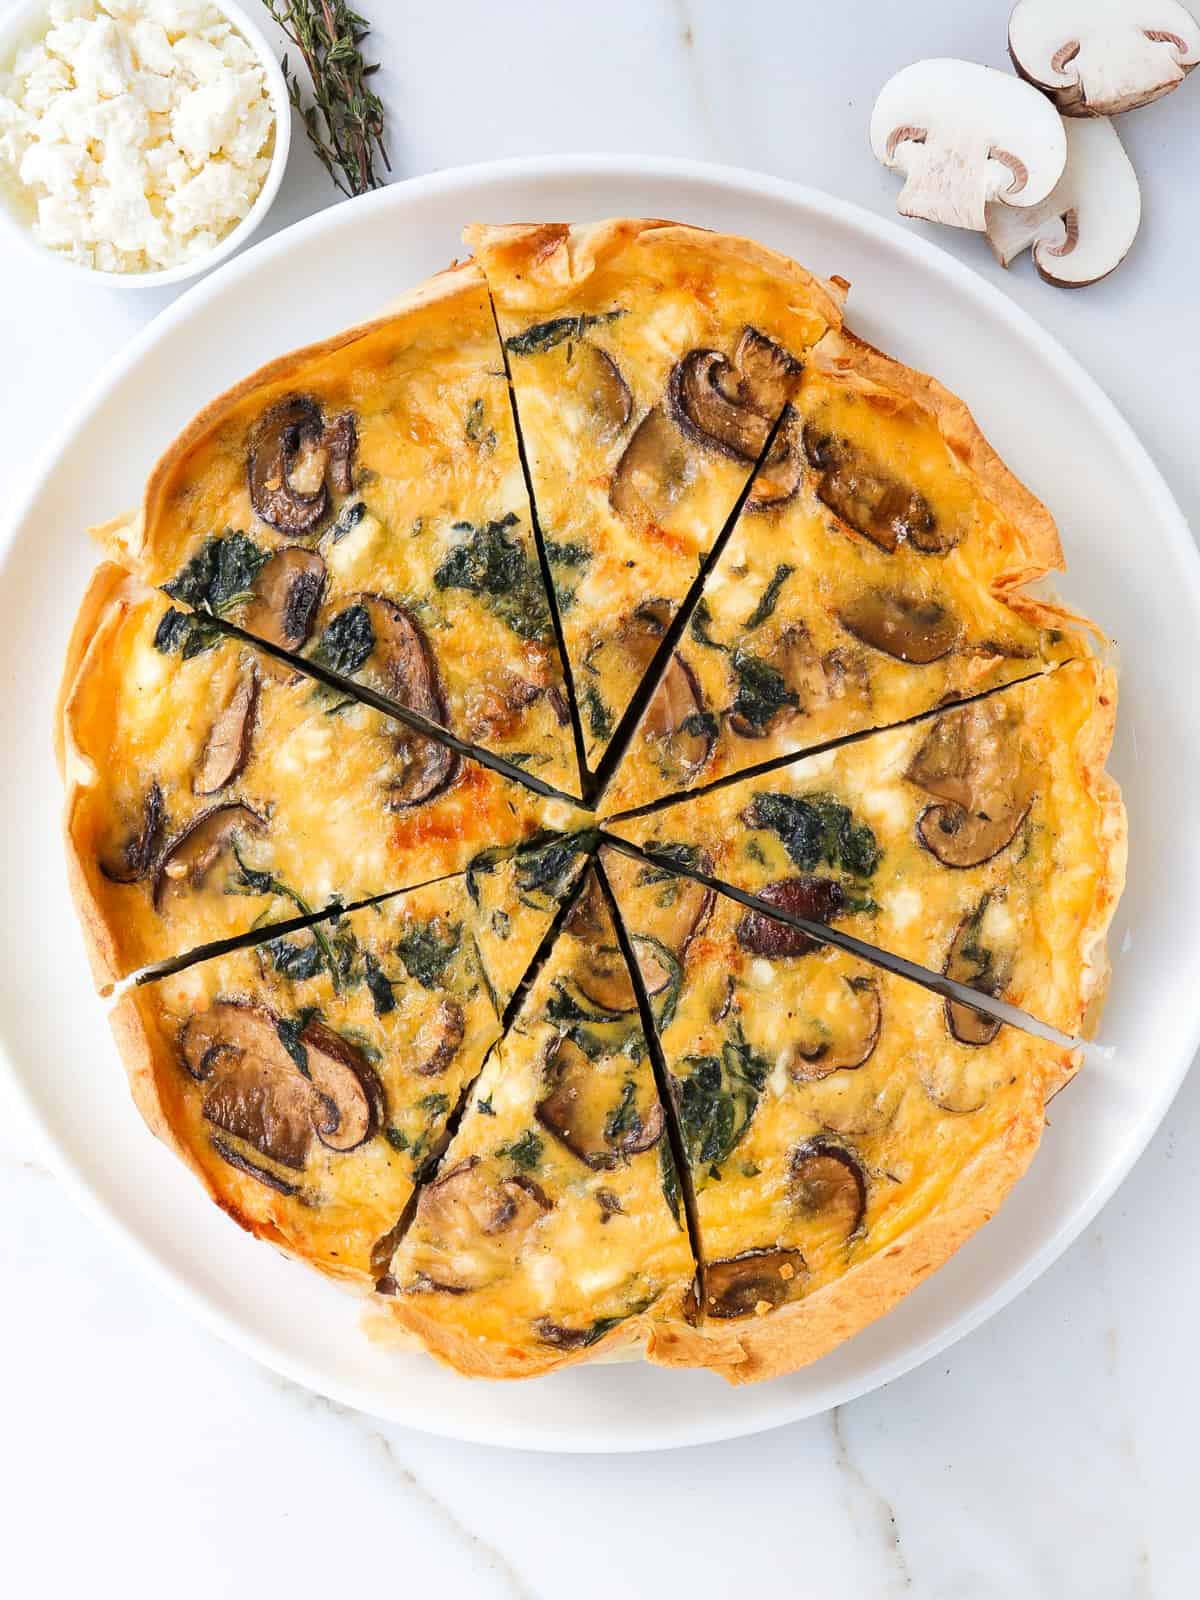 Spinach mushroom quiche on a plate.